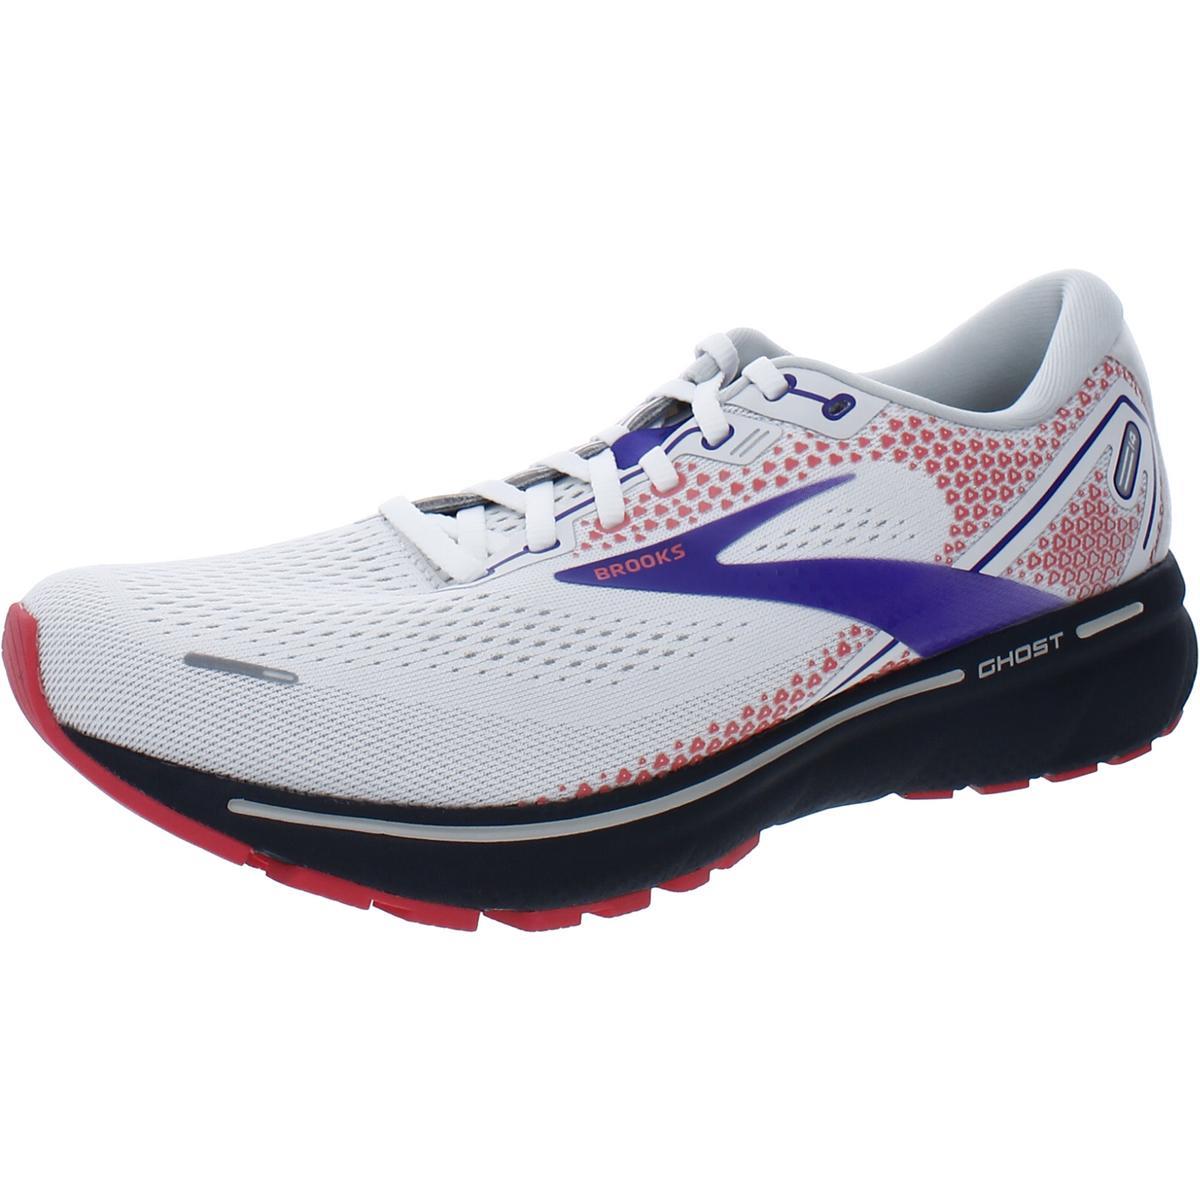 Brooks Womens Ghost 14 Fitness Workout Trainers Running Shoes Sneakers Bhfo 0544 White/Purple/Coral